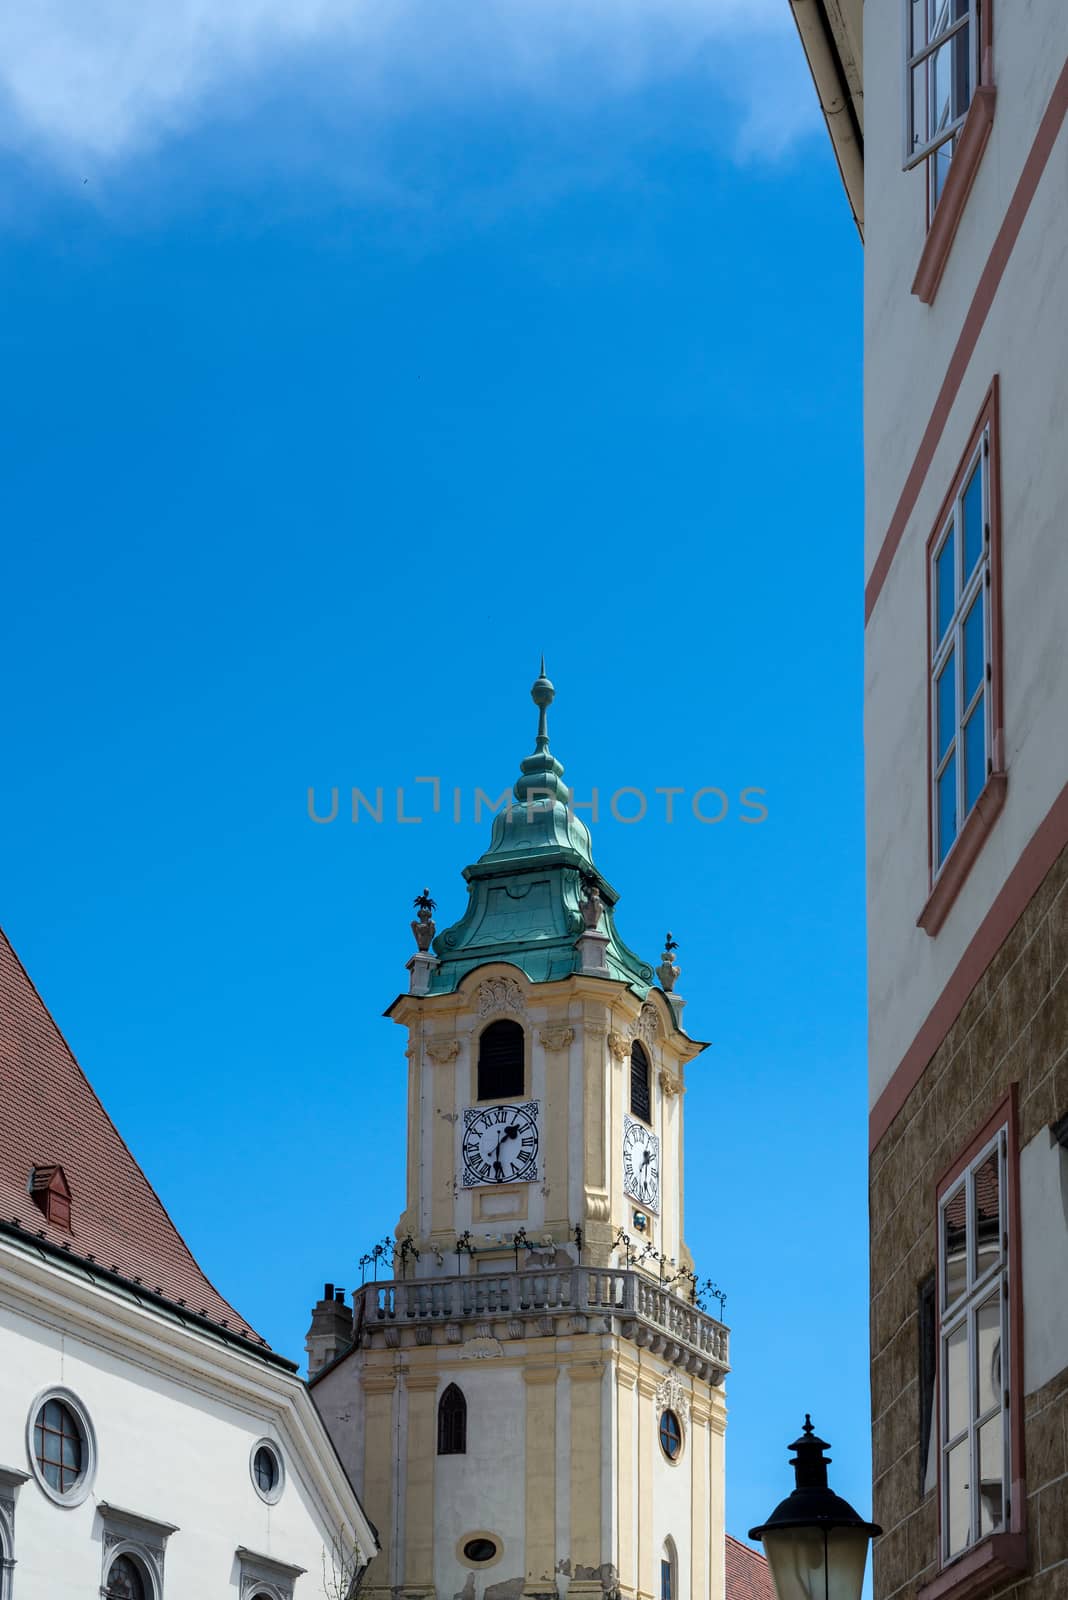 Bratislava city - view of Old Town Hall from Main Square in Brat by DNKSTUDIO